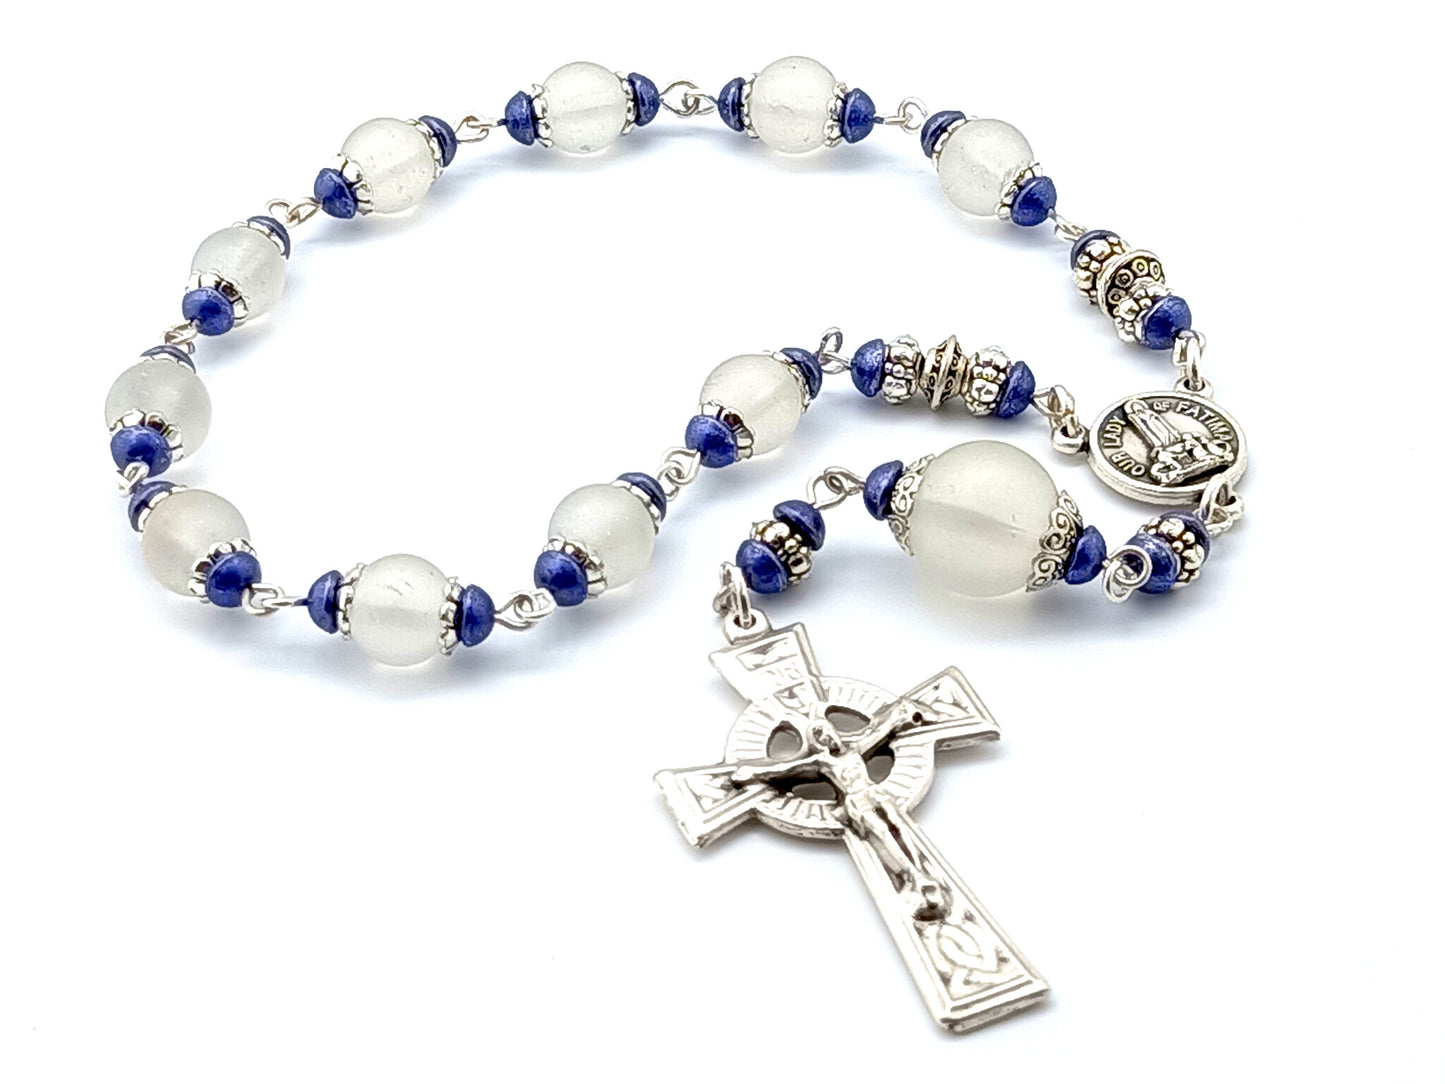 Our Lady of Fatima Relic medal single decade tenner rosary, Celtic crucifix, Fatima pocket rosary beads.